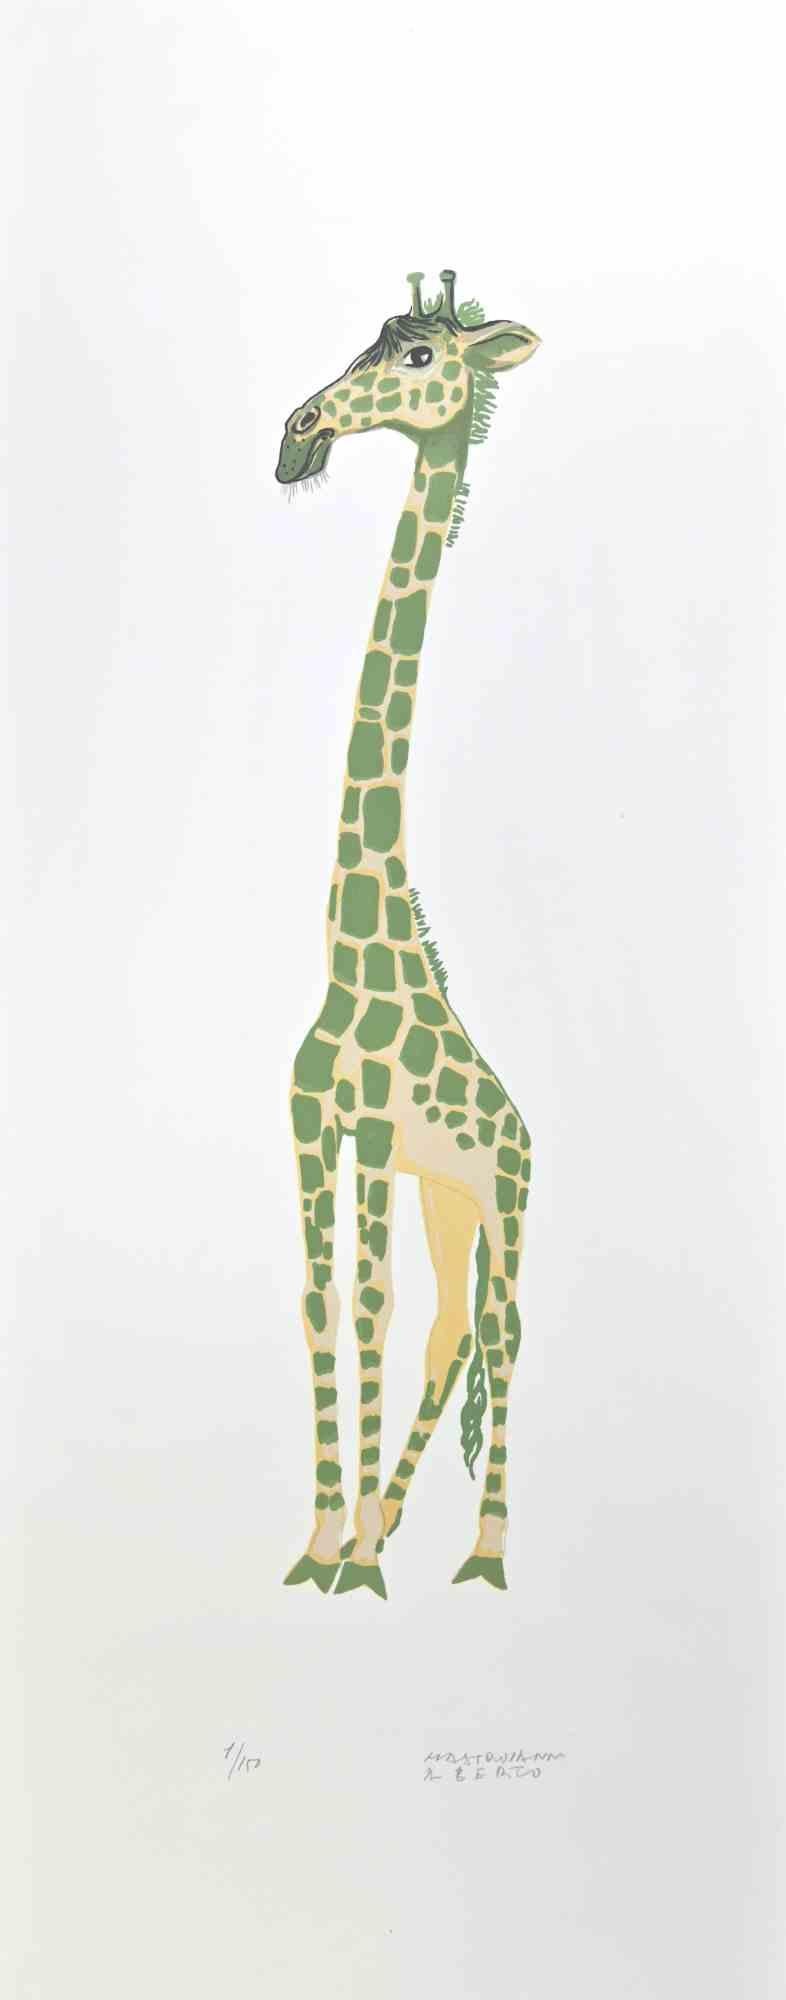 Girafe is a lithograph realized by Alberto Mastroianni in the 1970s.

Hand Signed on the lower right margin. Numbered on the lower margin in pencil. .

The artwork represents an interesting green girafe, a combination of fantasy and realism.

The